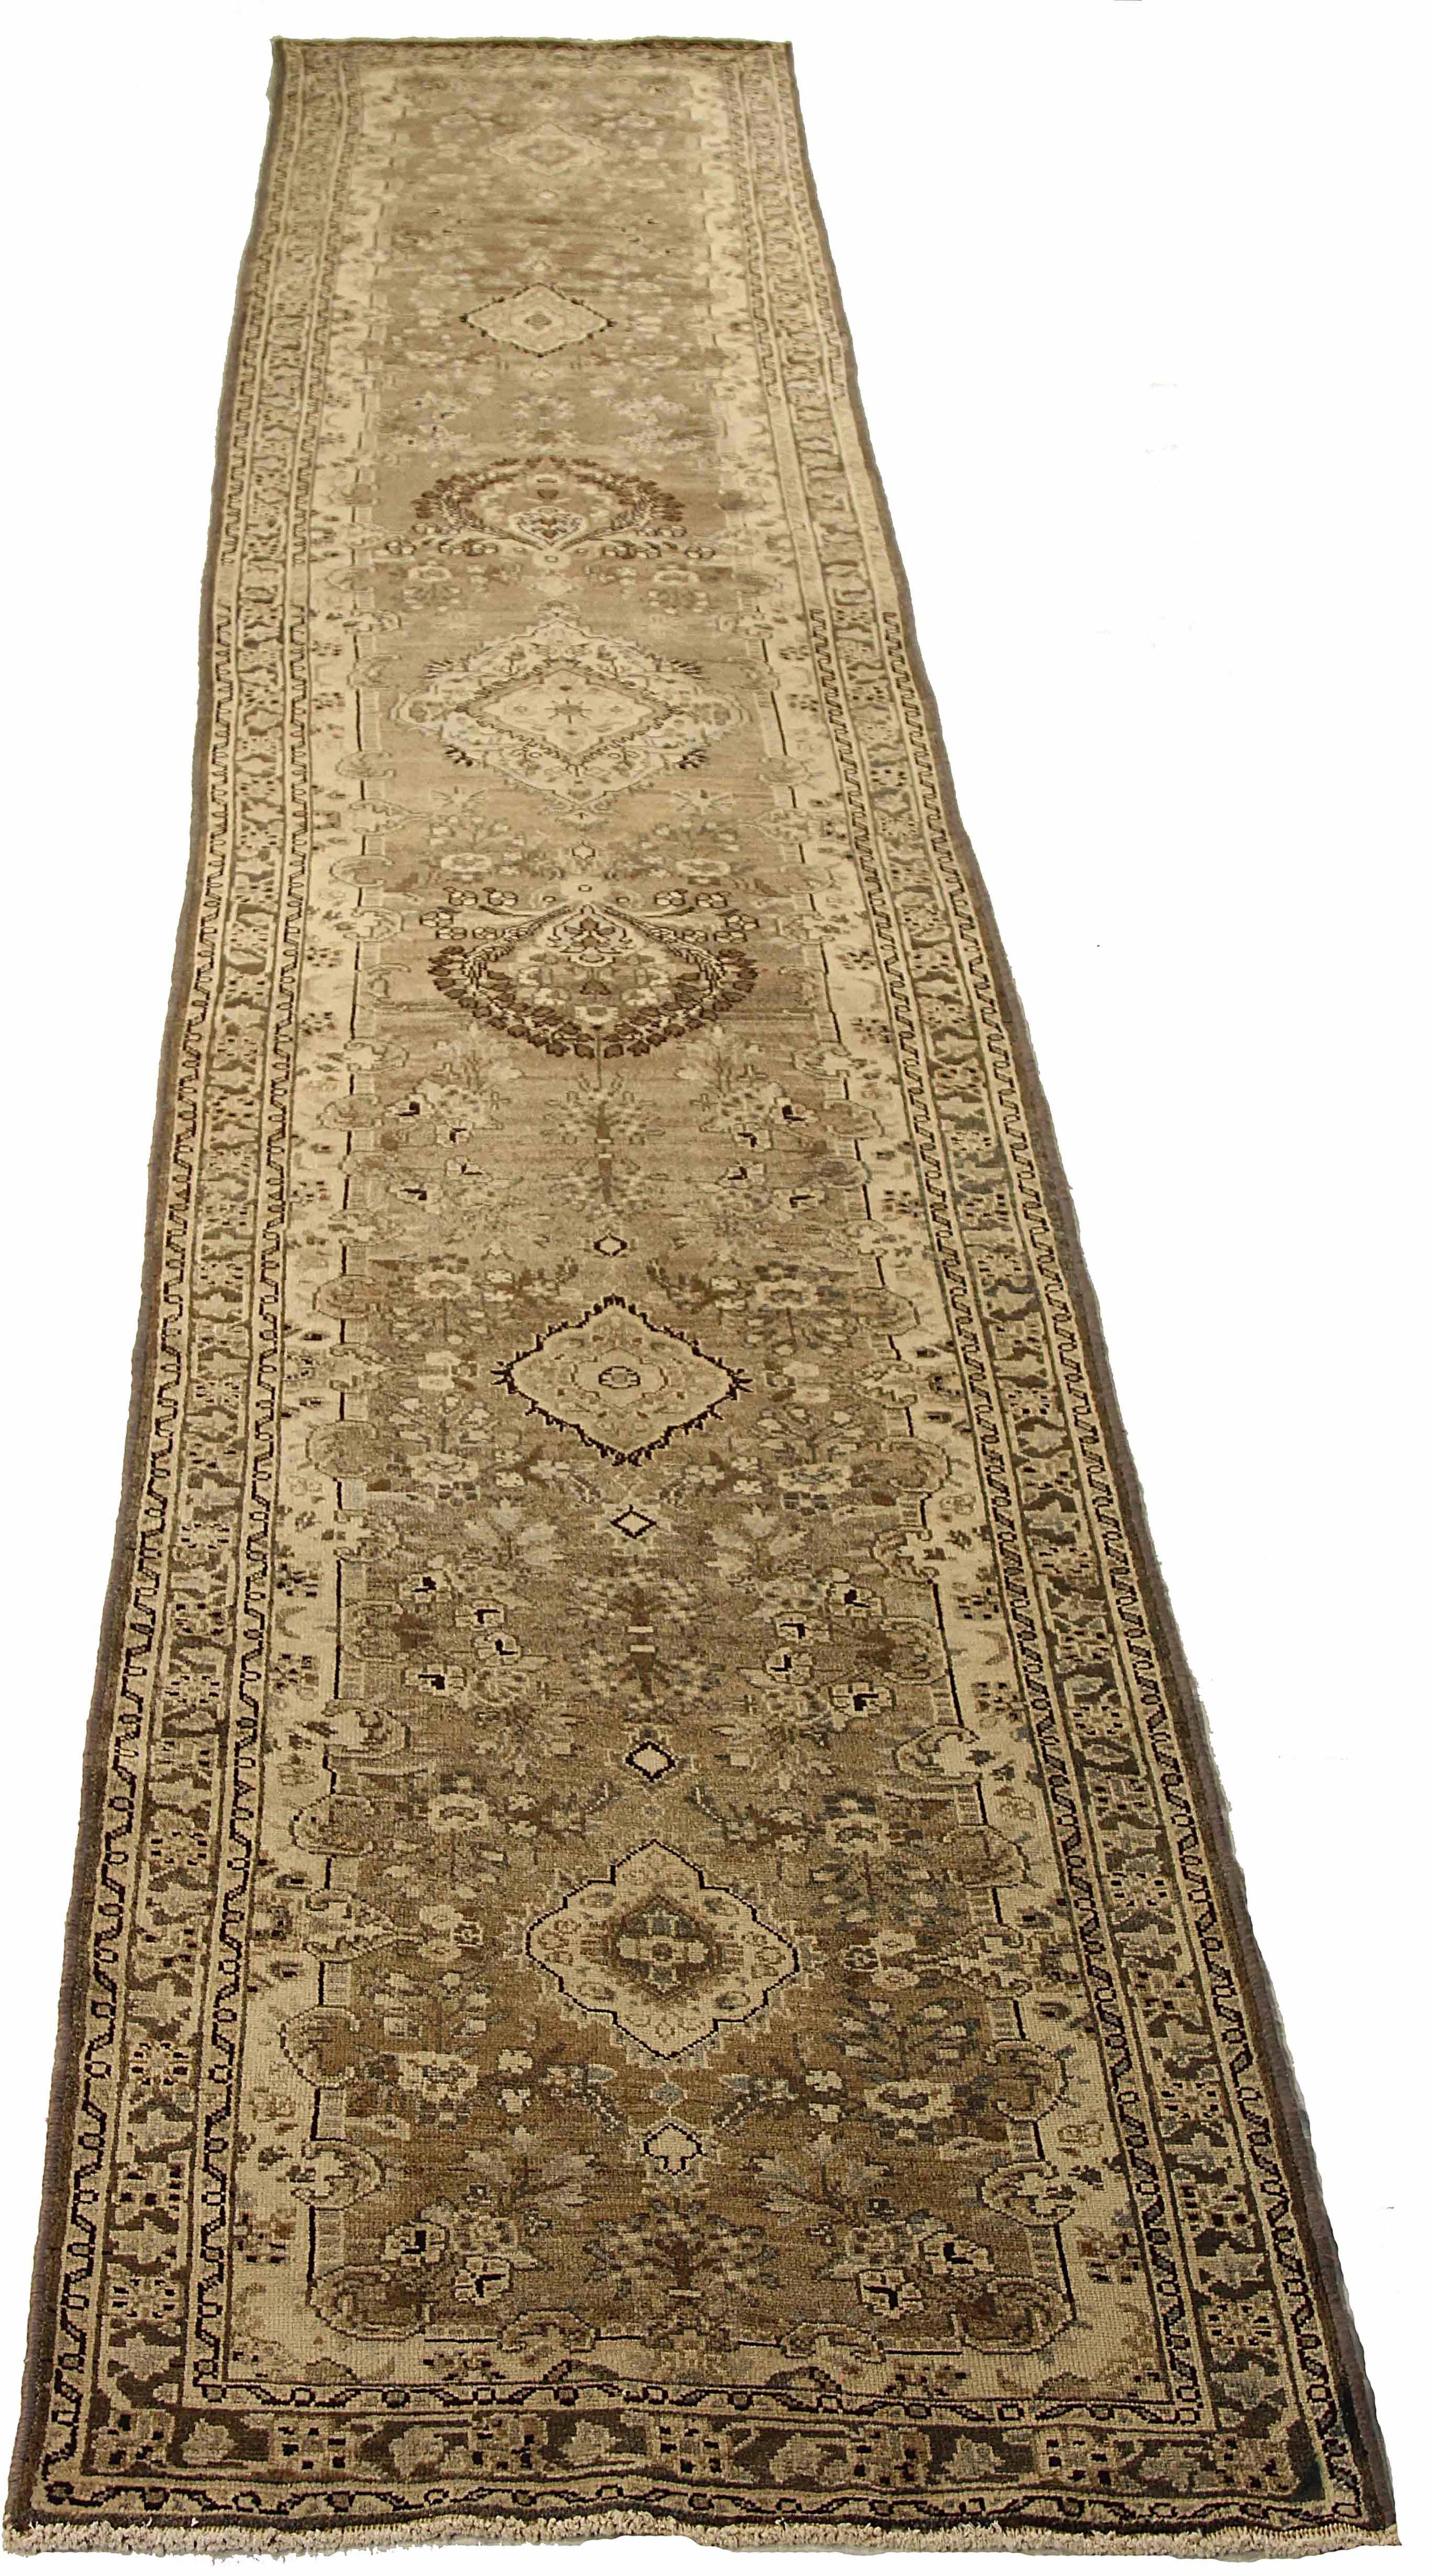 Antique Persian runner rug handwoven from the finest sheep’s wool. It’s colored with all-natural vegetable dyes that are safe for humans and pets. It’s a traditional Kolyai design handwoven by expert artisans. It’s a lovely runner rug that can be